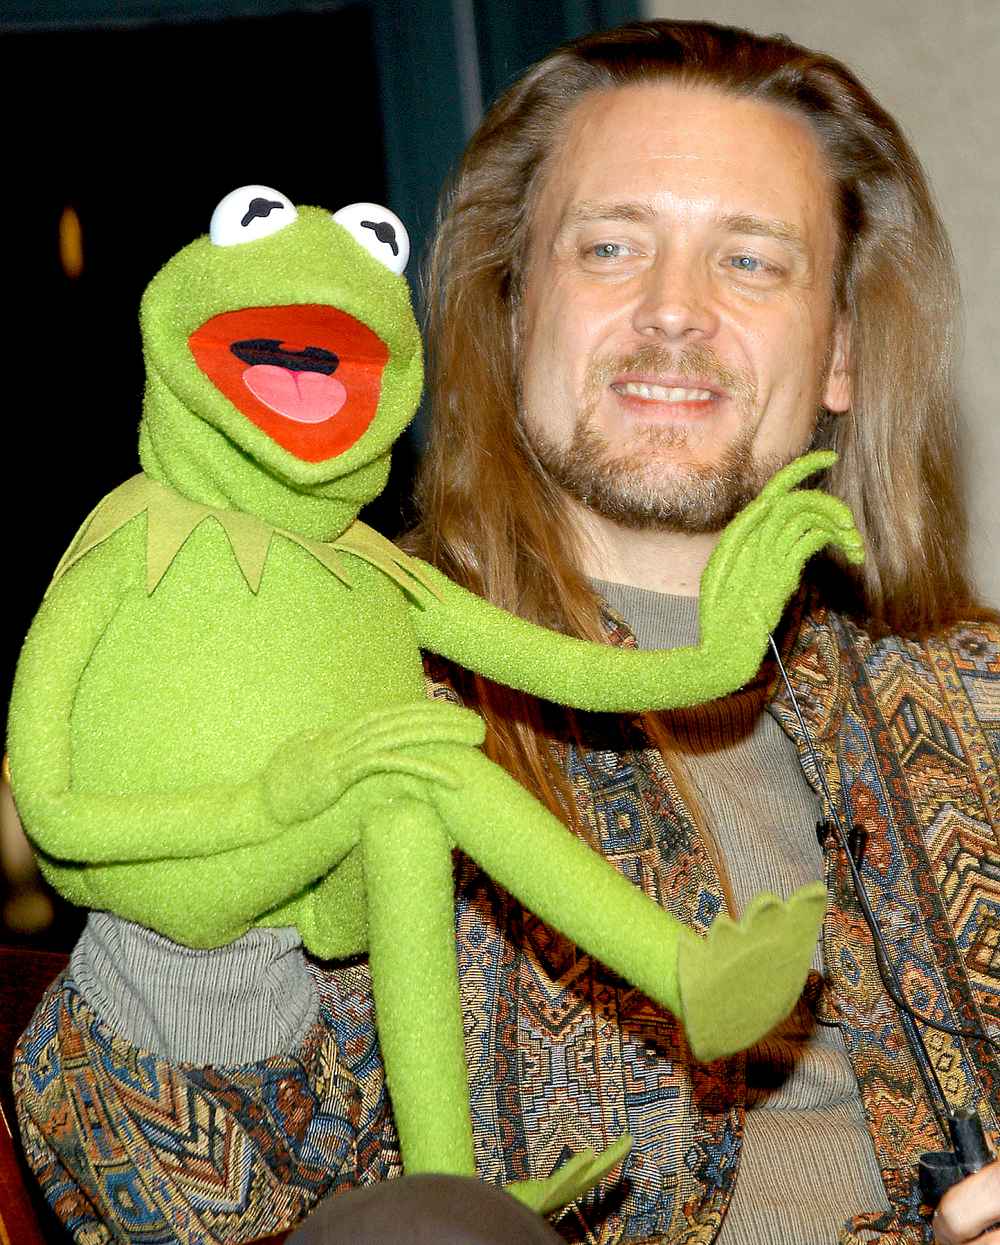 Muppet Kermit the Frog and his operator Steve Whitmire take questions from the audience November 14, 2003, at Barnes & Noble Union Square in New York City.